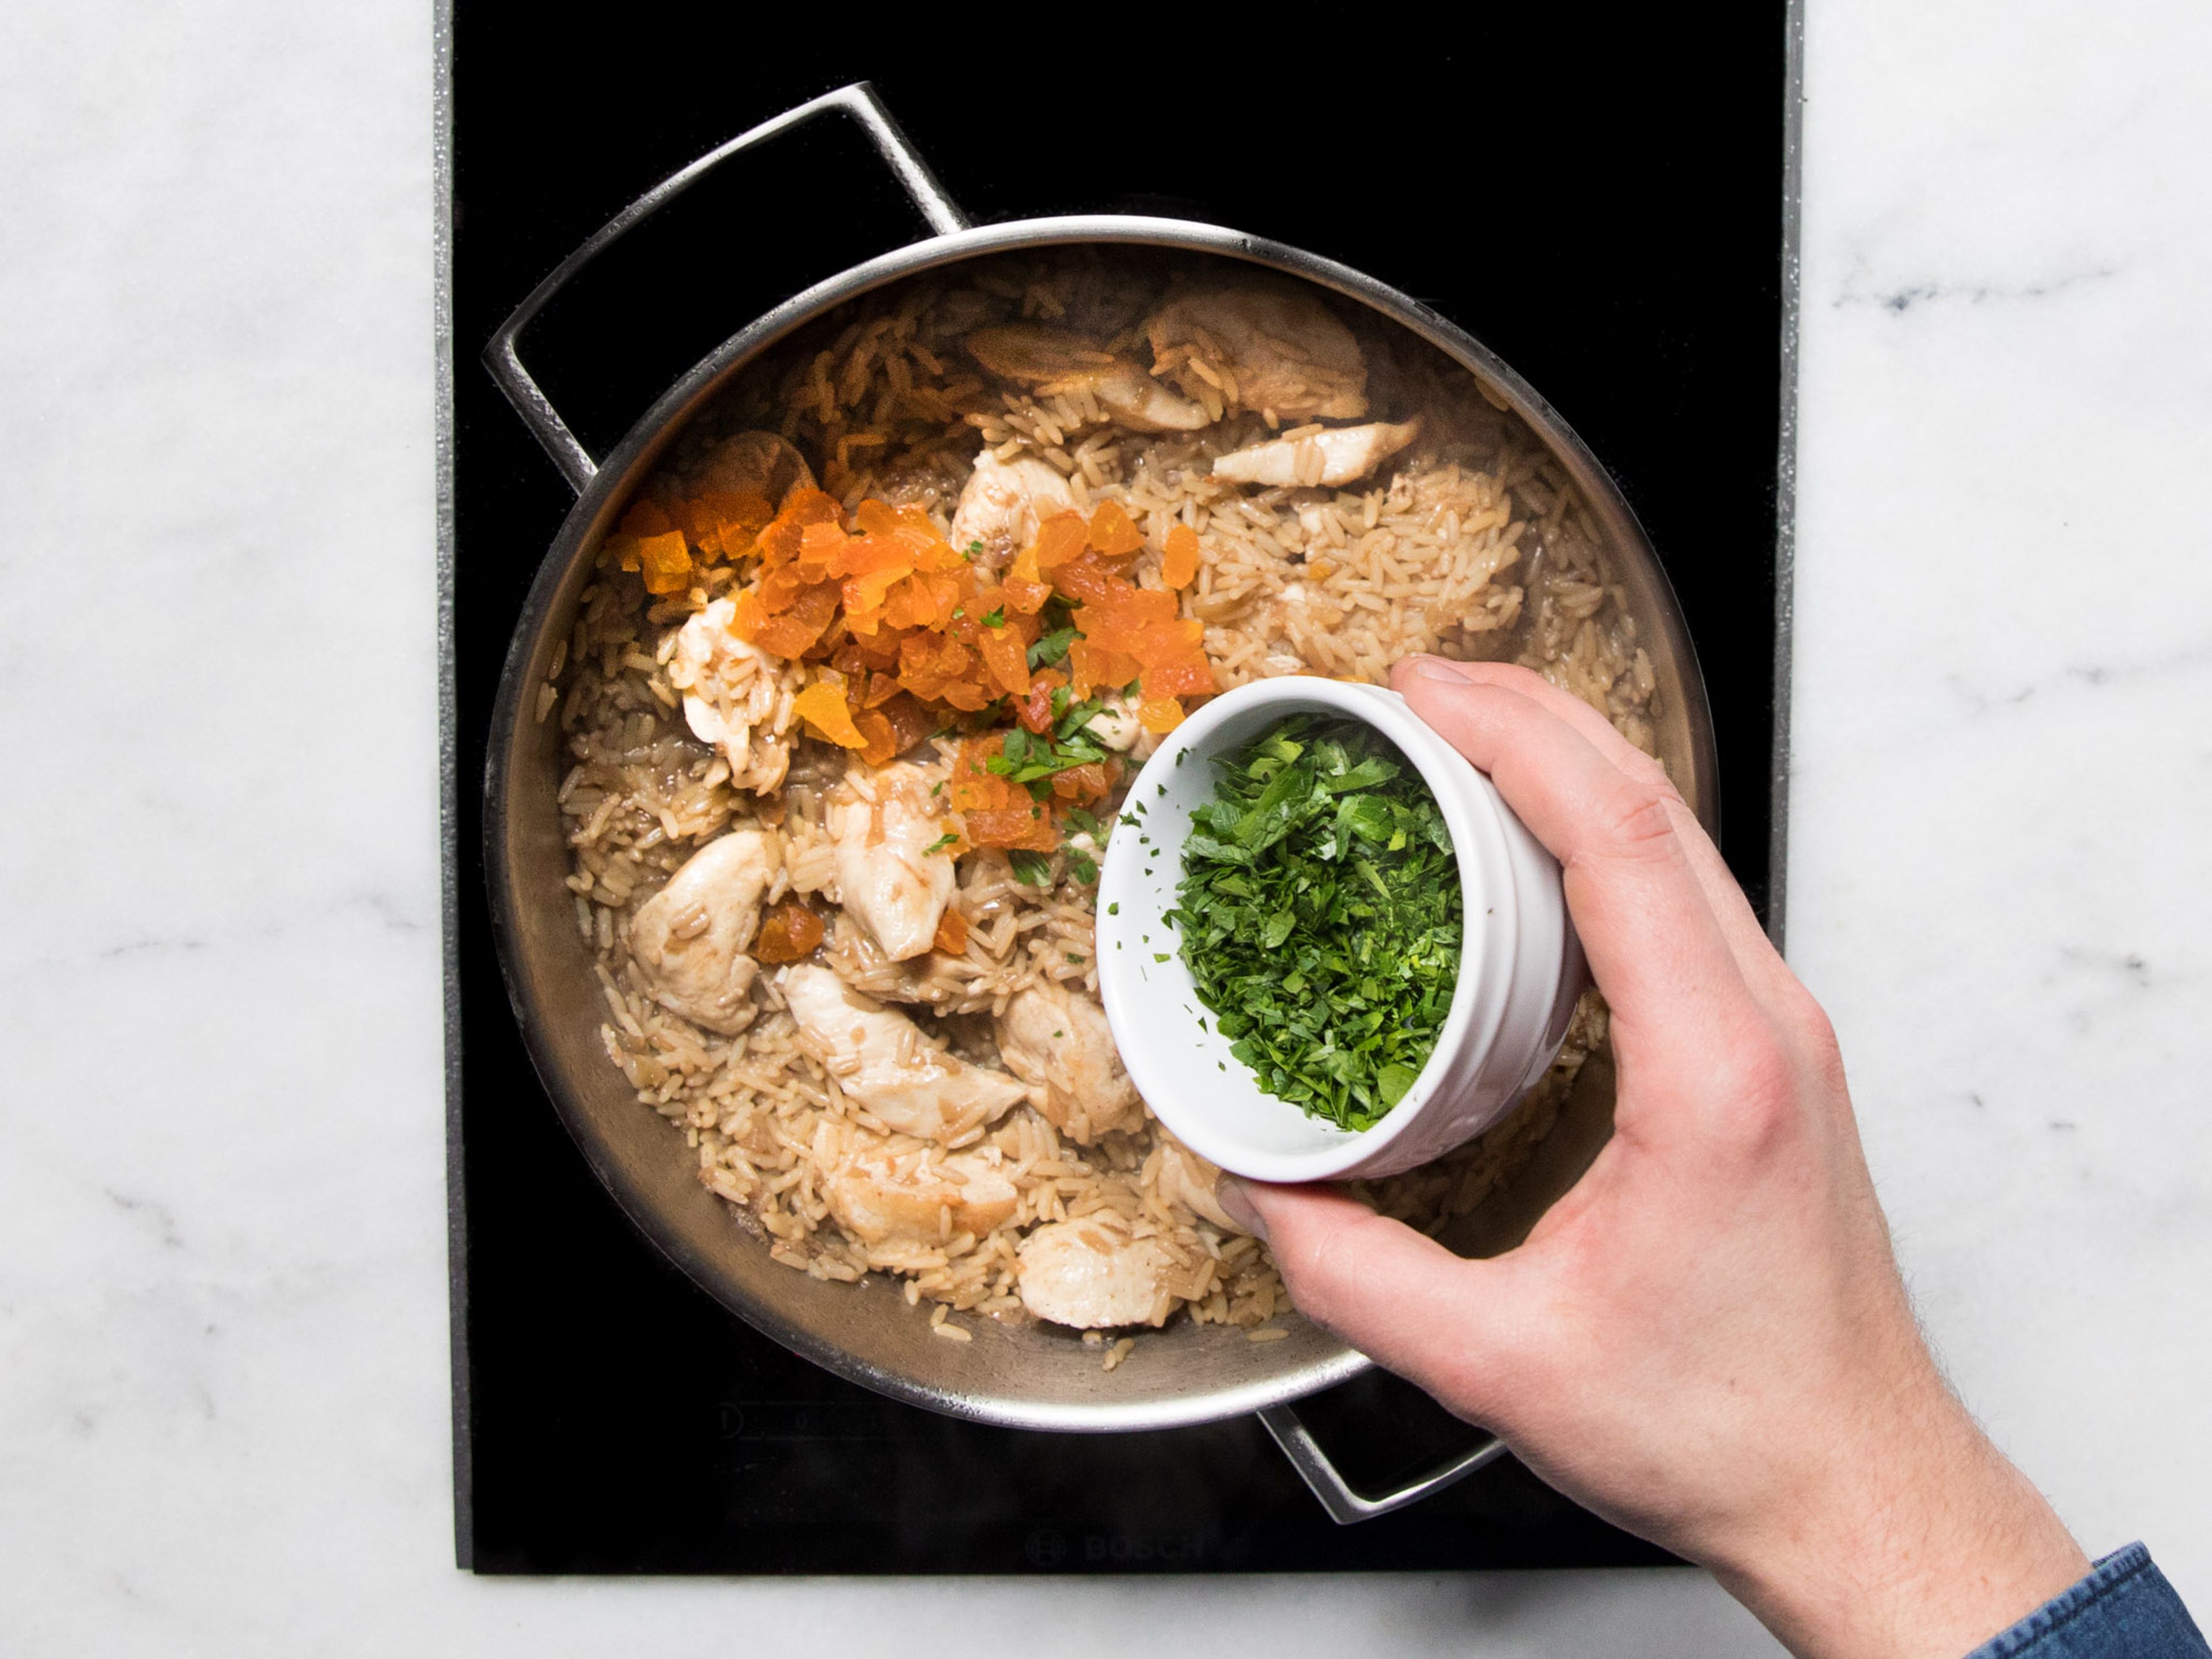 Once the rice is done, remove the lid and add chicken back to the frying pan. Heat for approx. 2 min., then add dried apricots and chopped parsley, and stir to combine. Serve pilaf with yogurt on top, and sprinkle with sliced almonds, parsley, and dukkah. Enjoy!